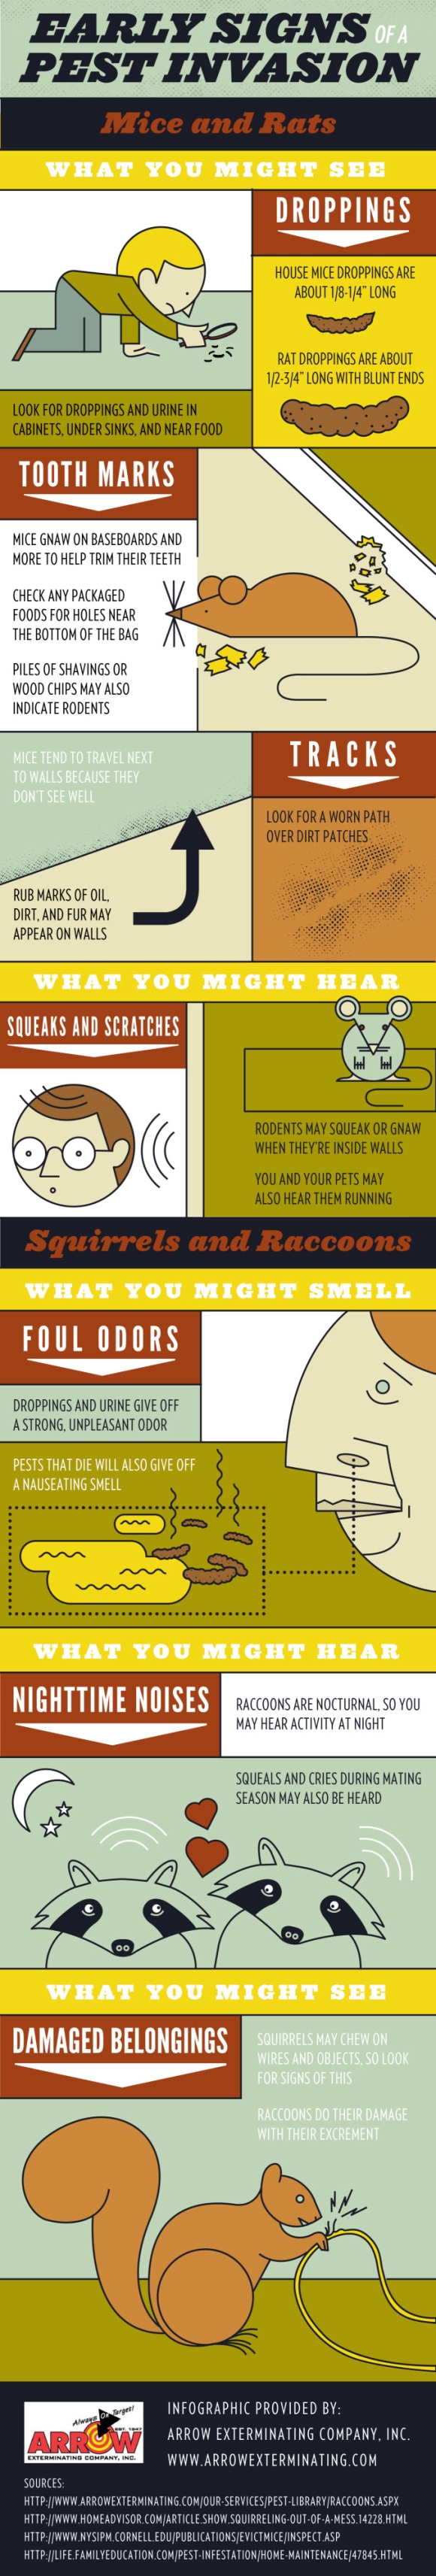 Early-Signs-of-a-Pest-Invasion-Infographic-01